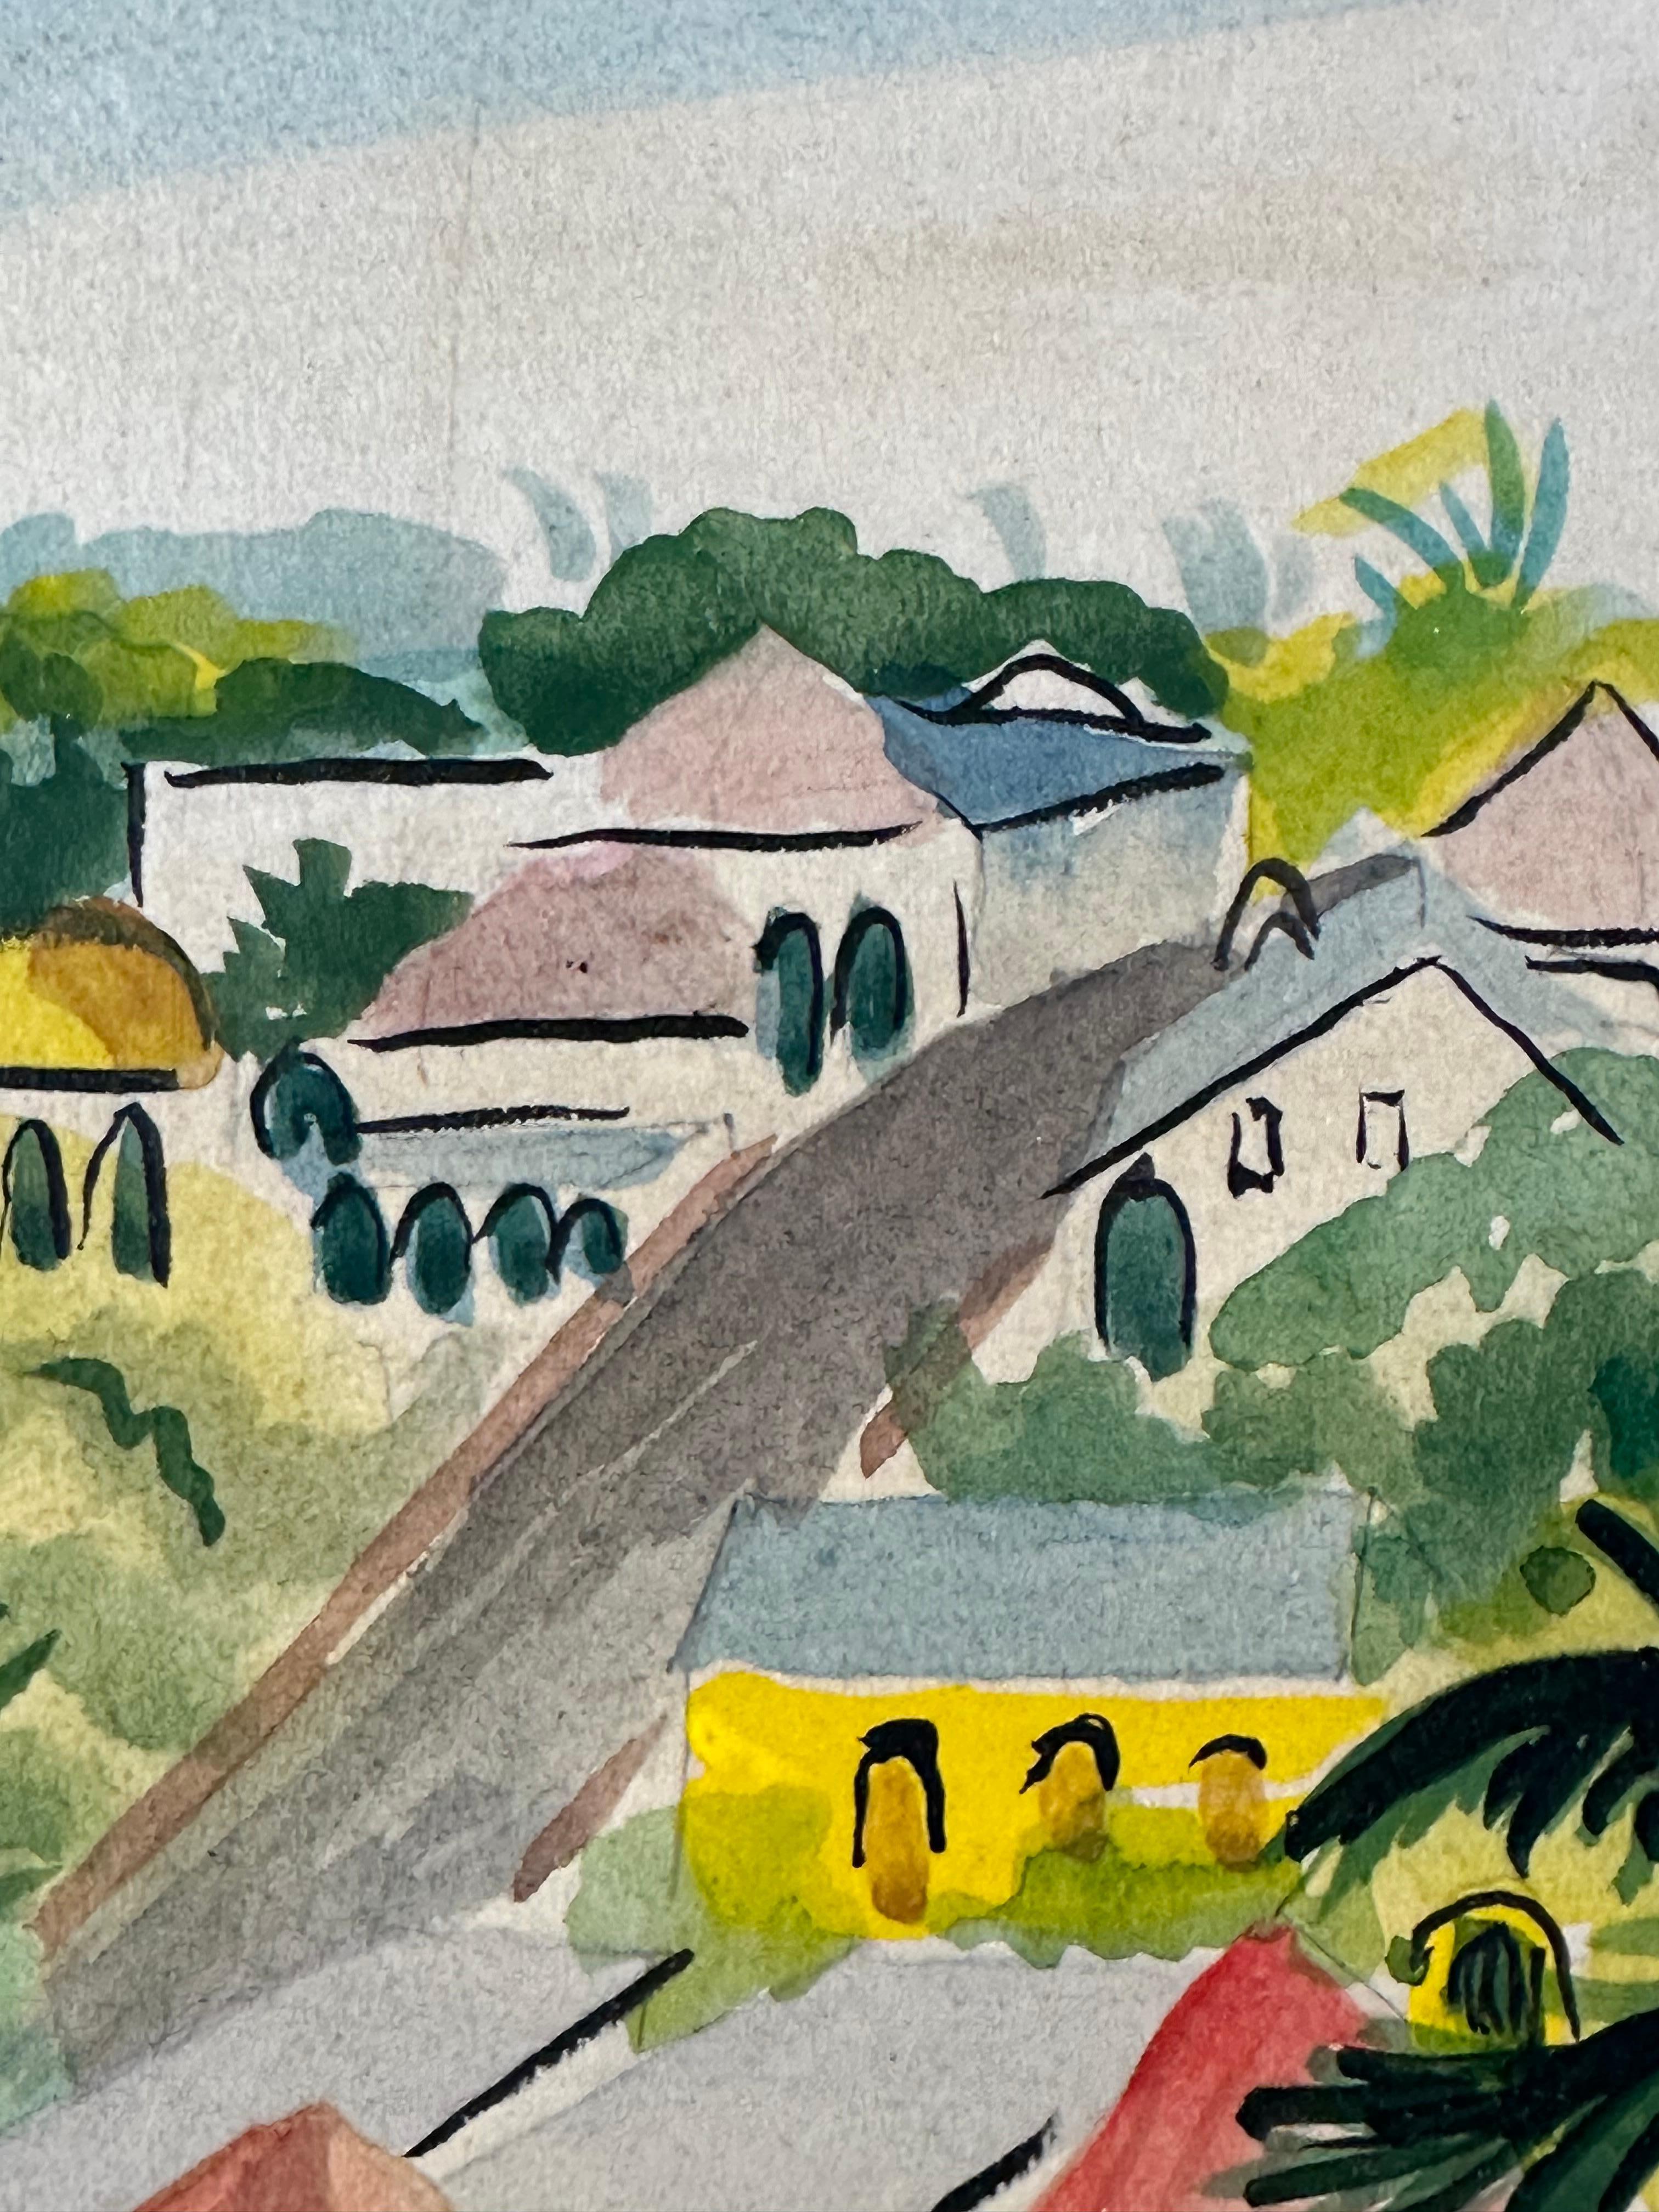 Inez McCombs (1895-1975).

Virgin Islands, ca. 1950.

Alkyd on paper mounted to masonite panel.

Measuring 13 x 16 inches; 18 x 21 inches framed.

Signed lower right. 

Philadelphia-born painter Inez McCombs knew how to stay busy. She was a